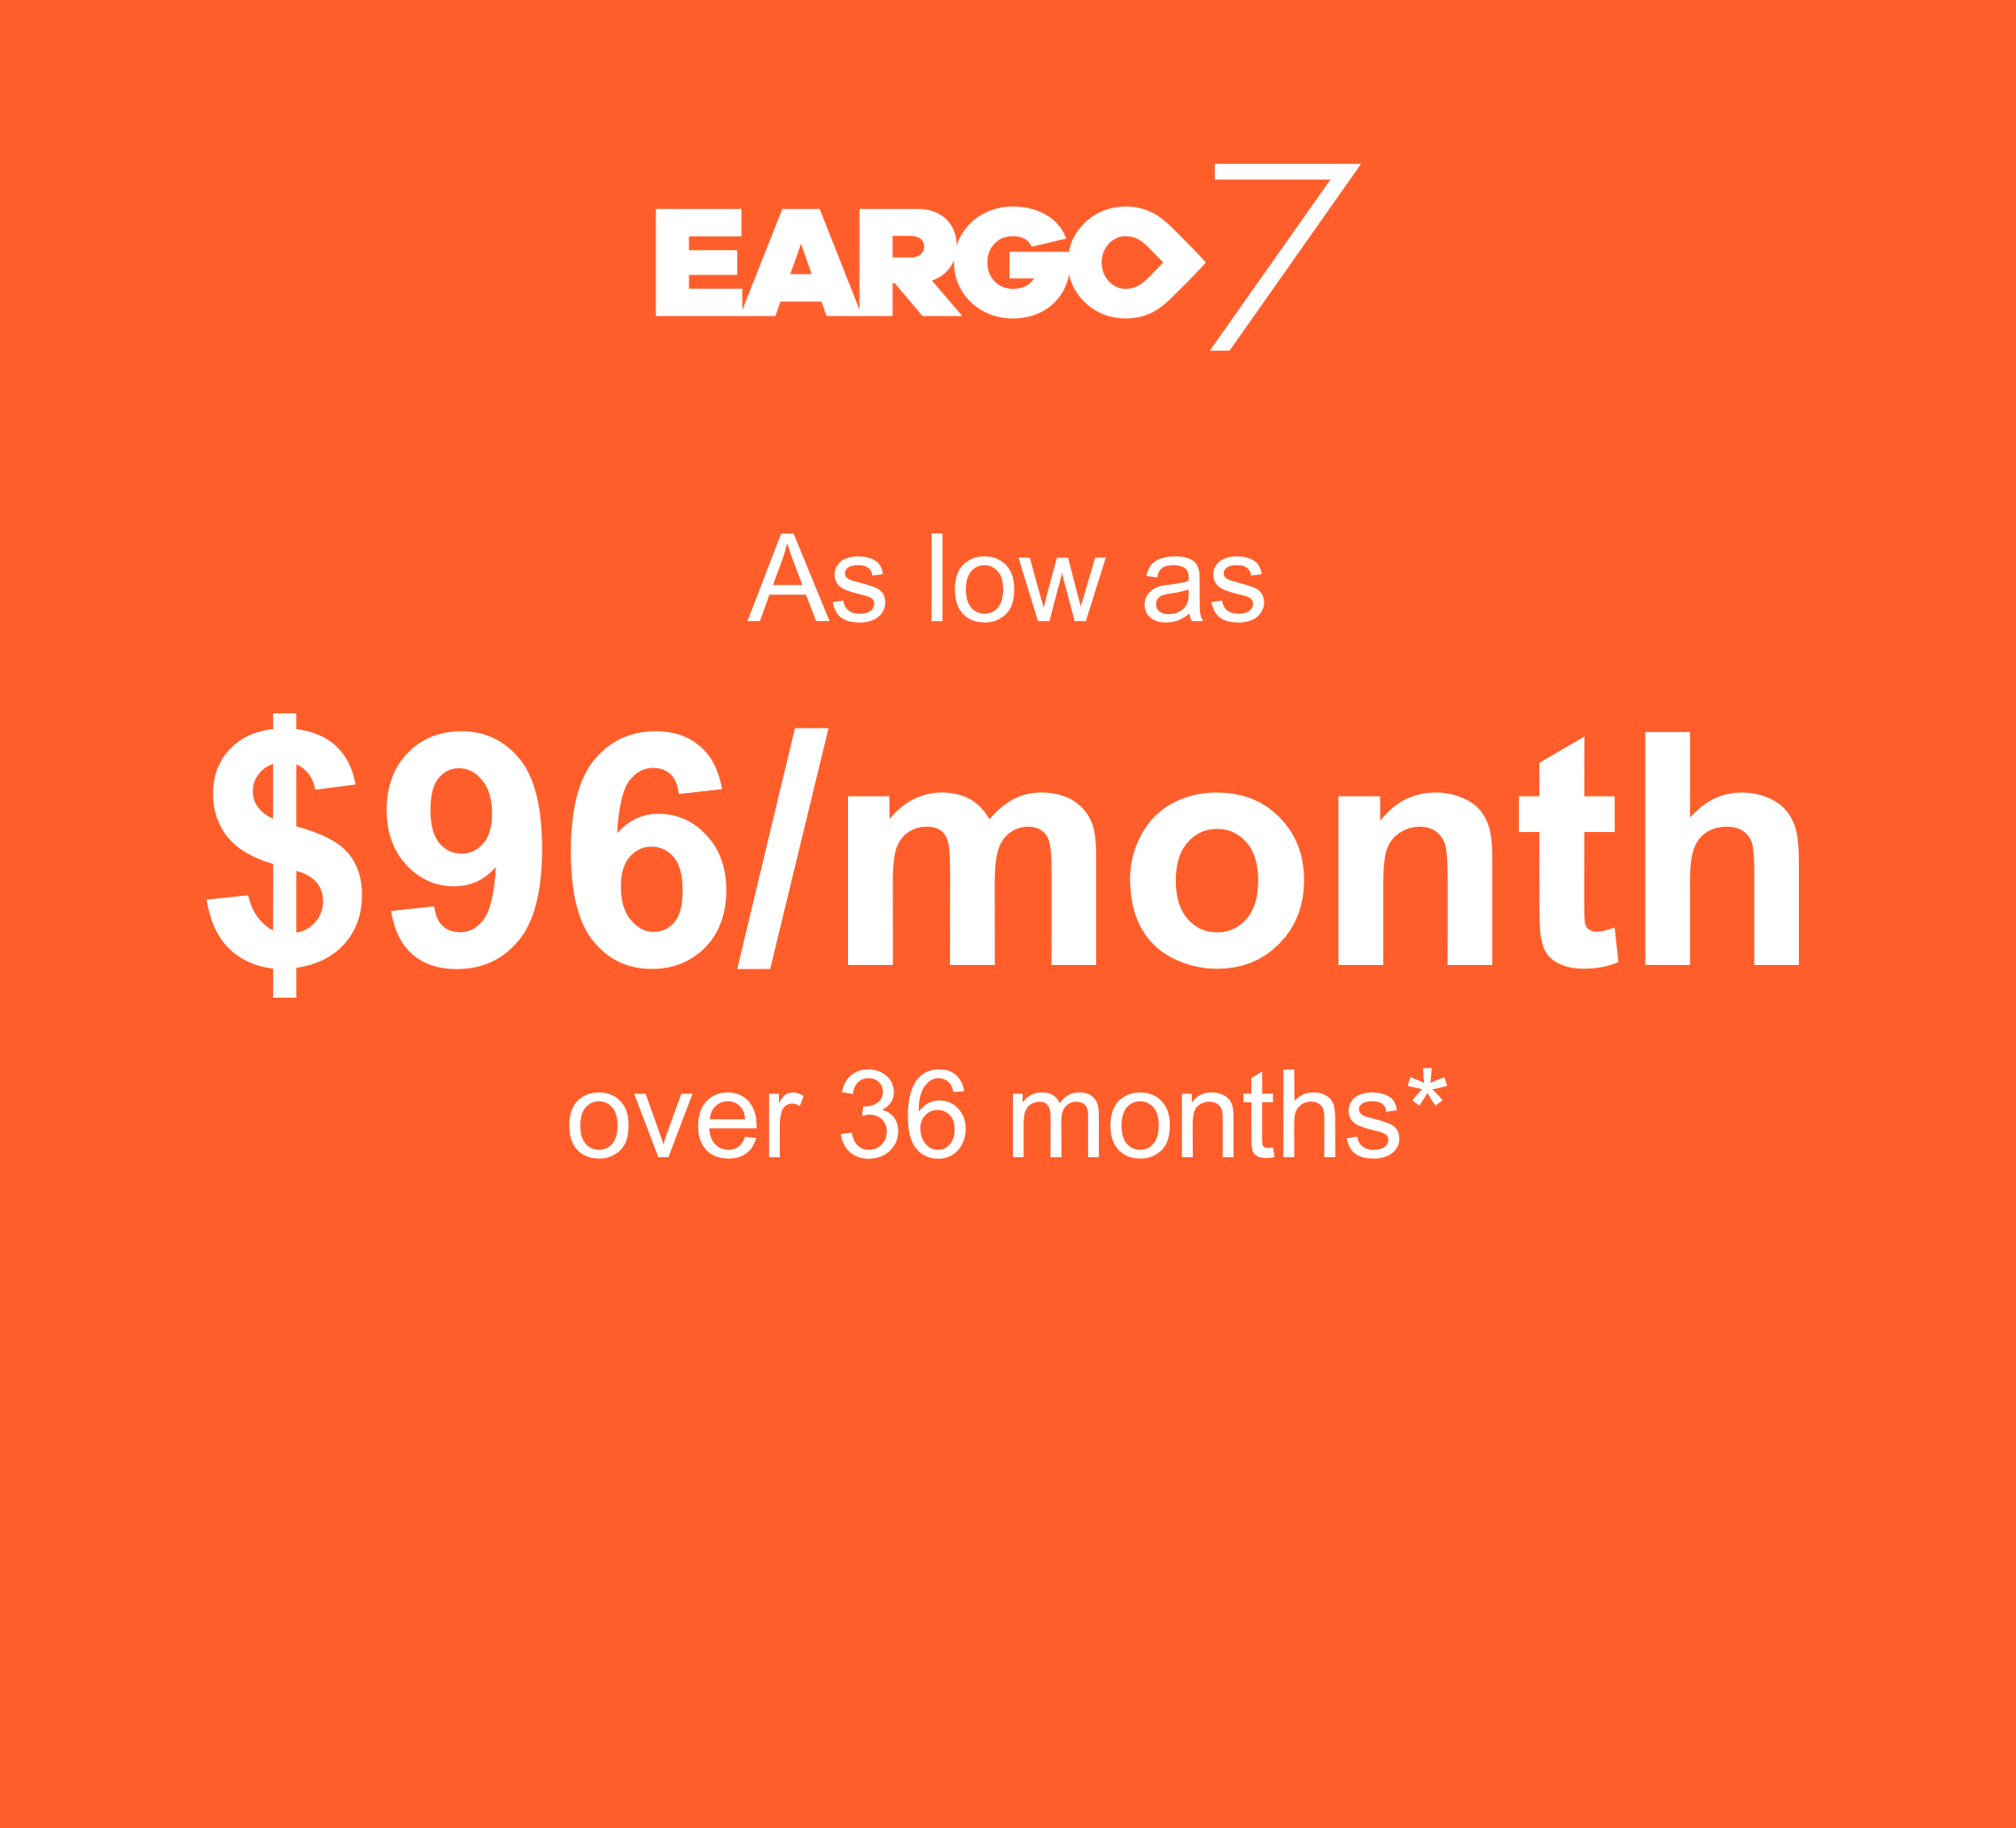 As low as $96/month over 36 months with 9.99% APR